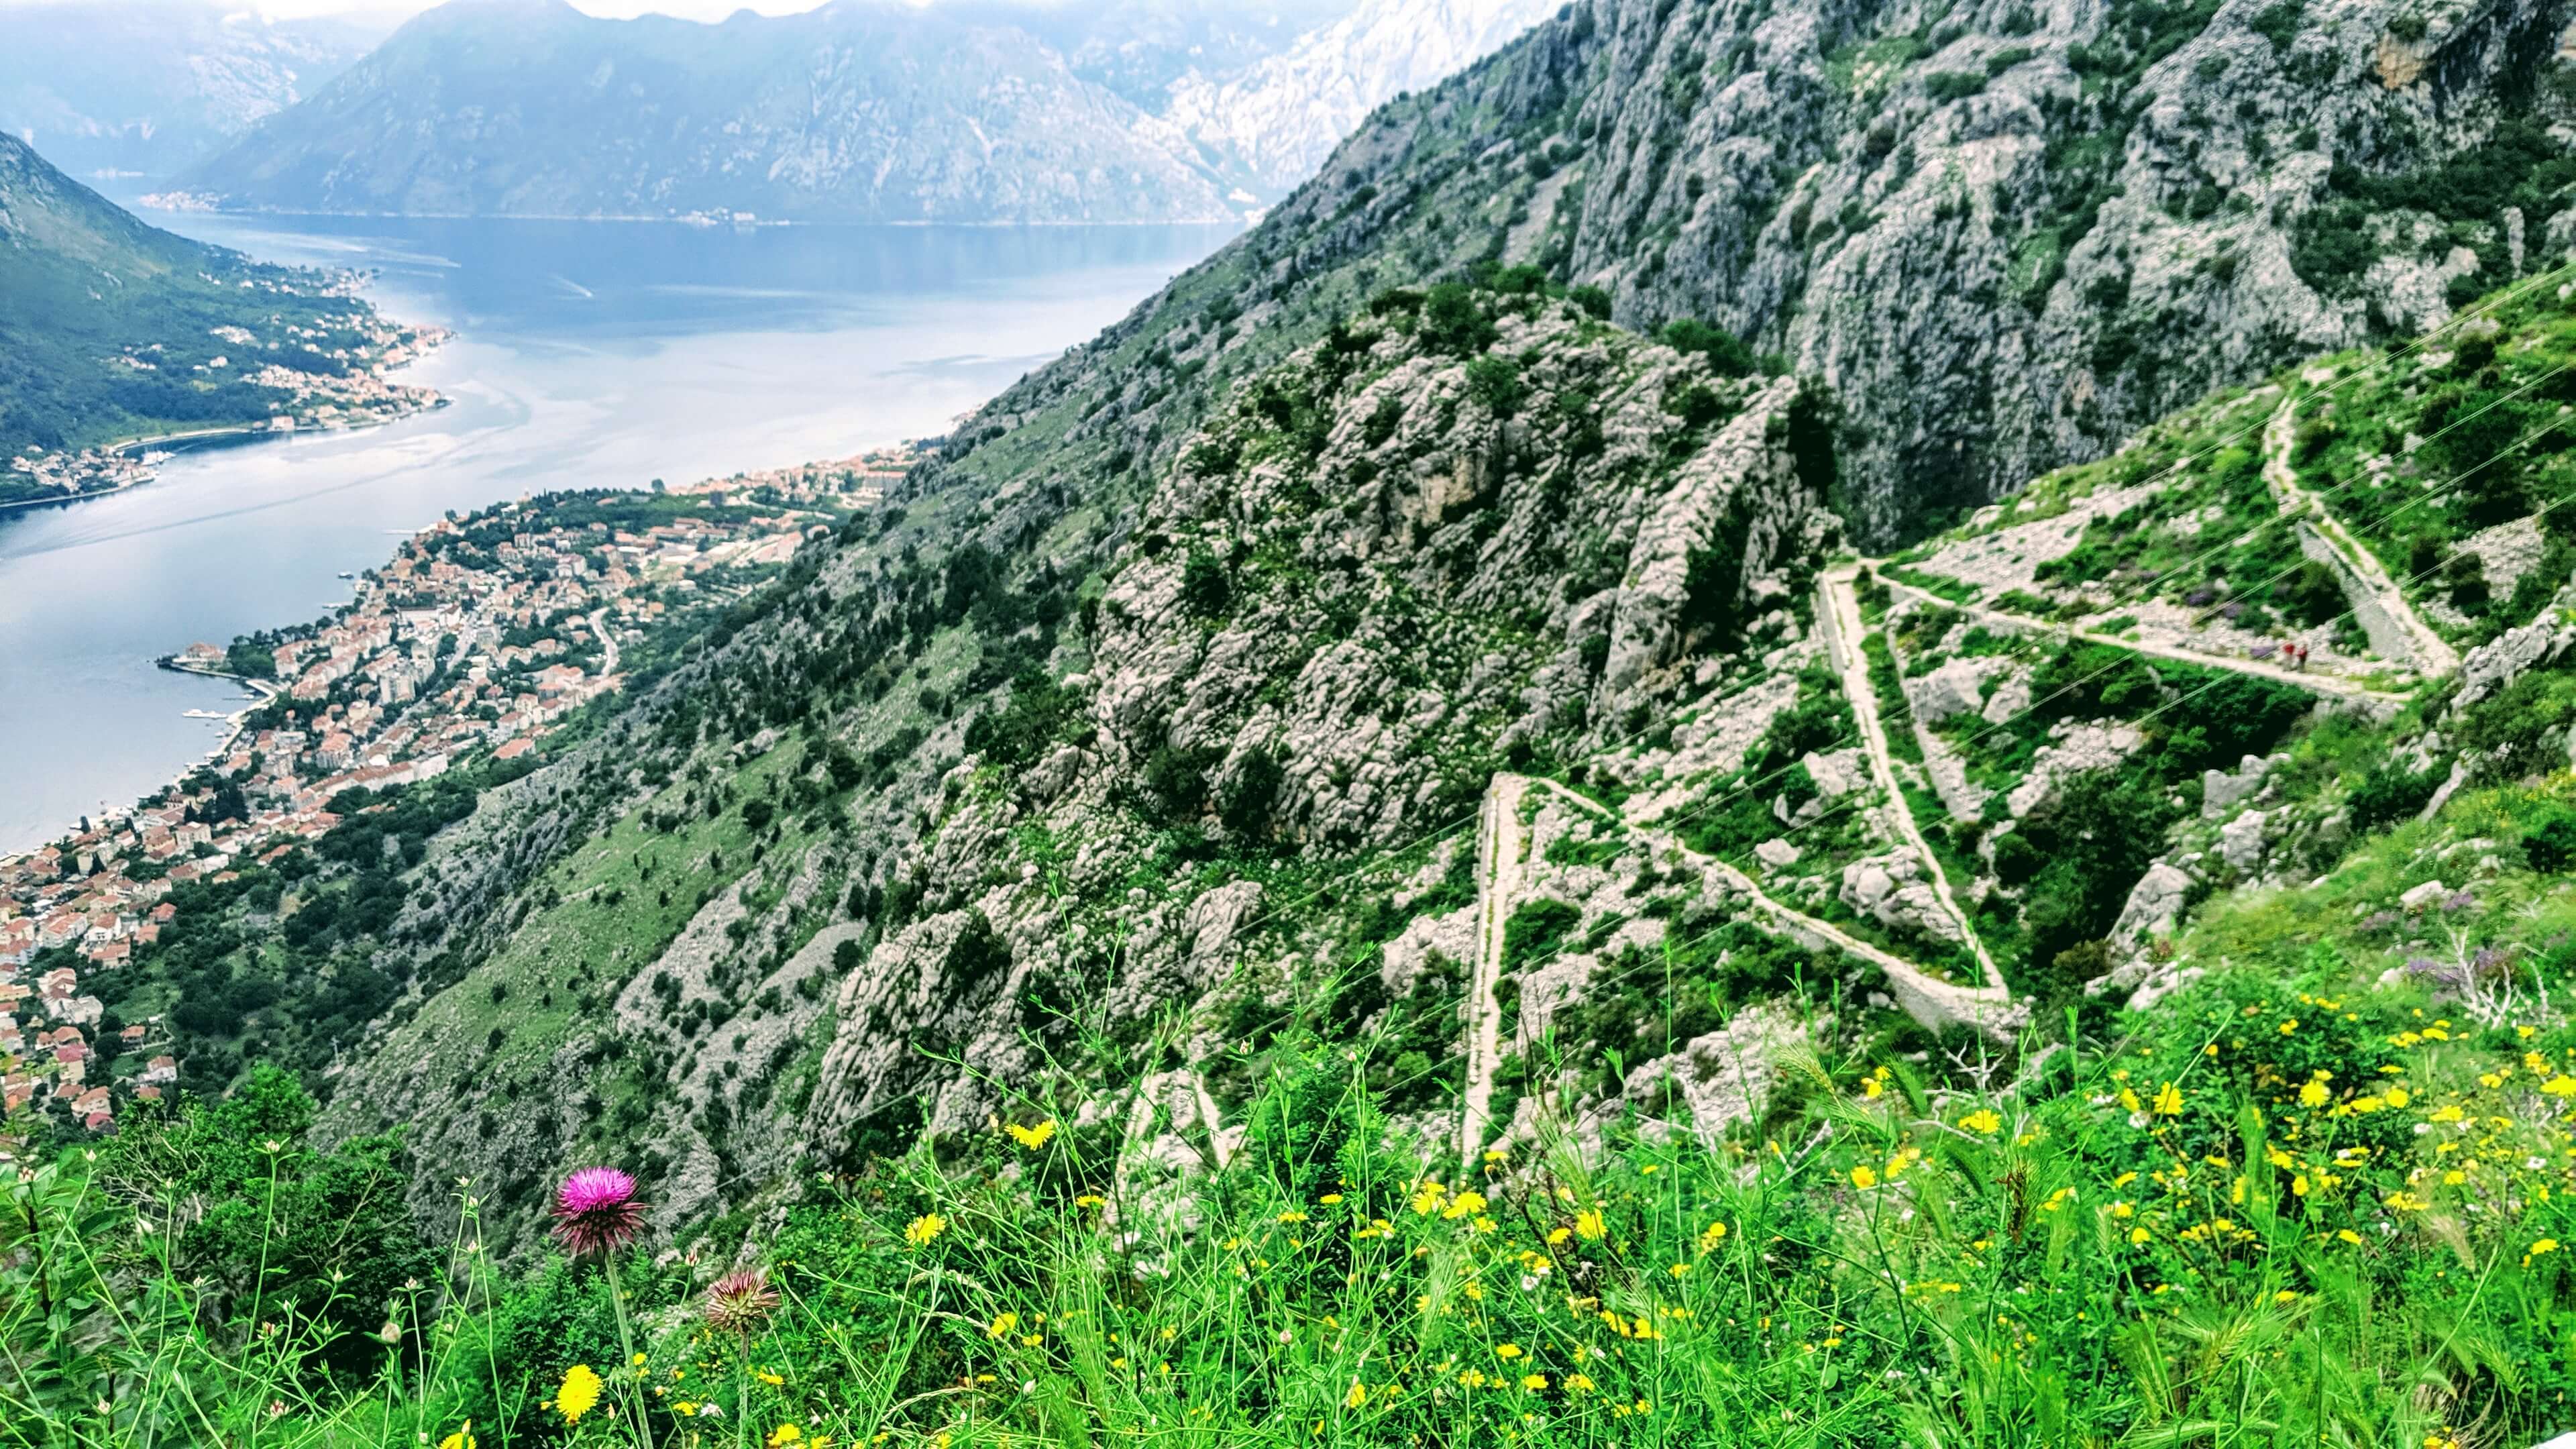 Switchback overlooking the Bay of Kotor.